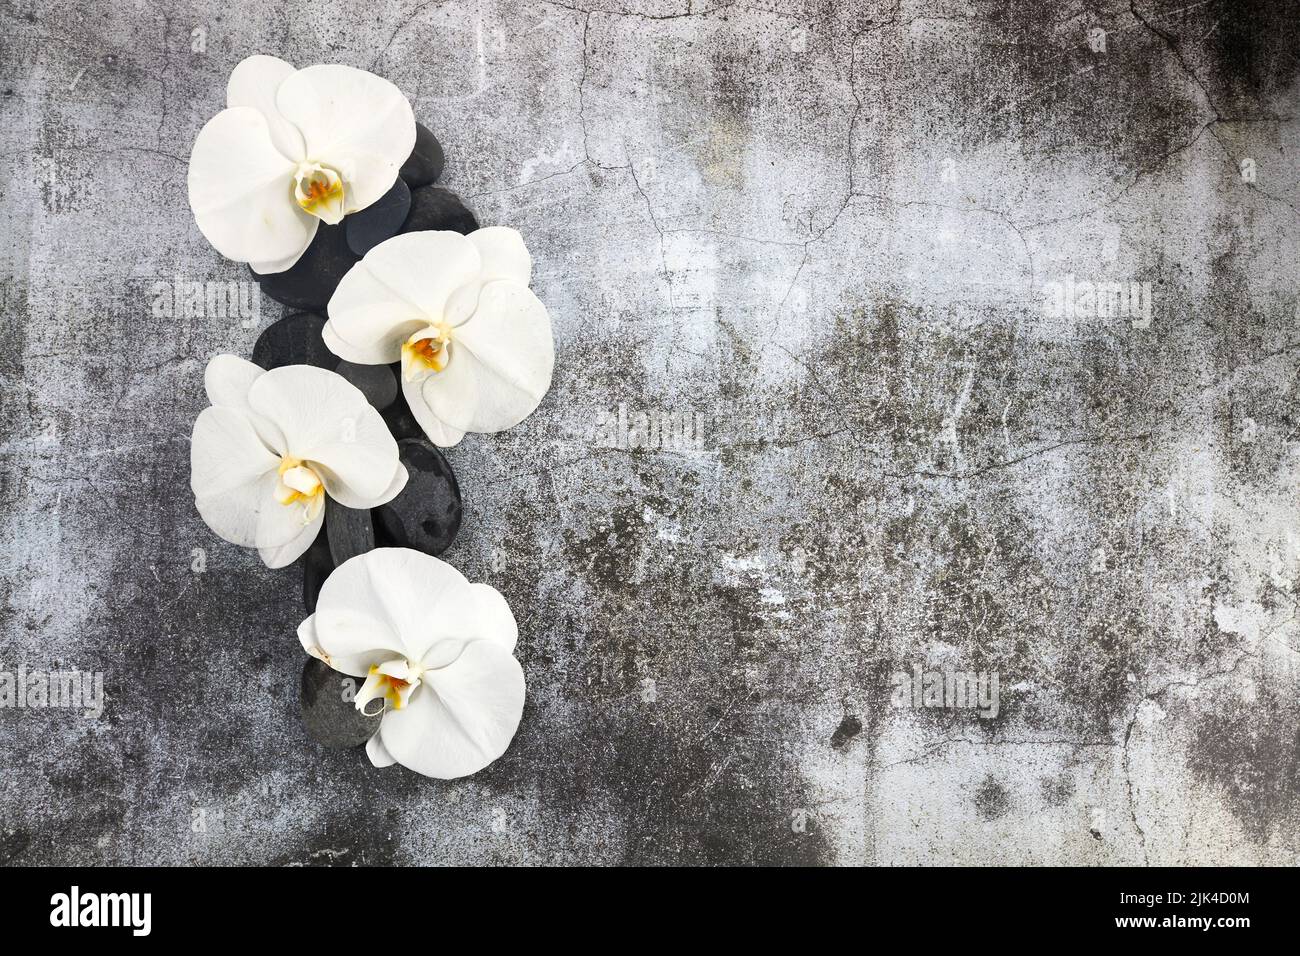 White orchid and black stones on grey background Stock Photo